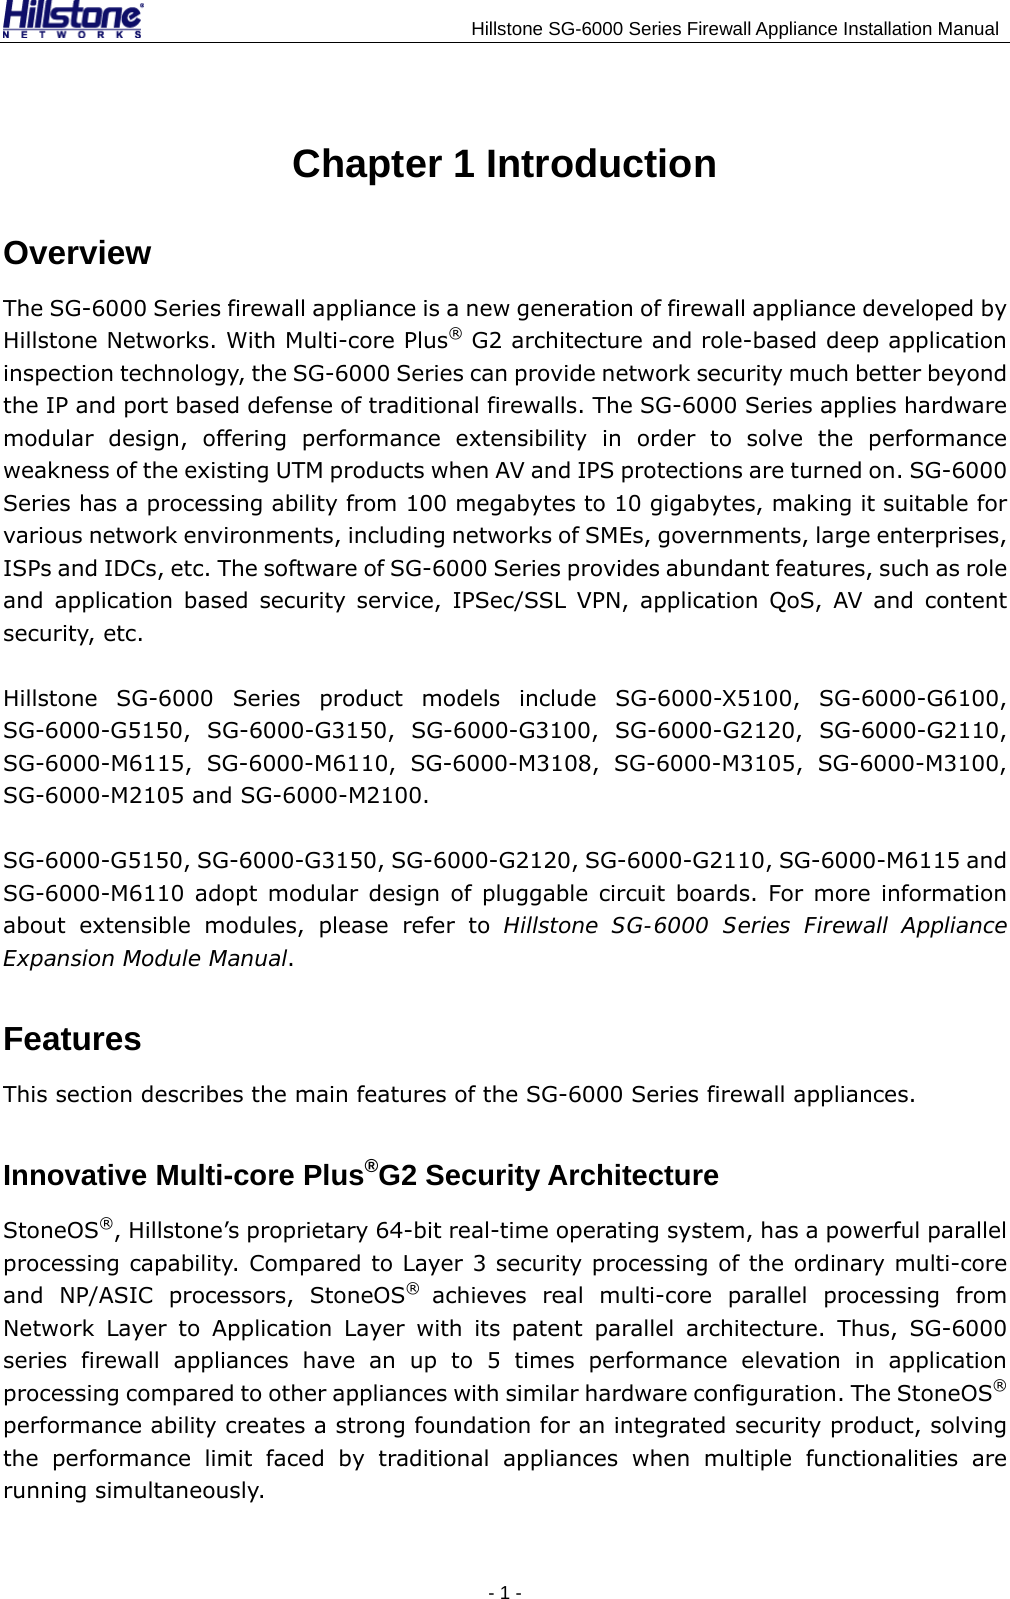                                    Hillstone SG-6000 Series Firewall Appliance Installation Manual Chapter 1 Introduction Overview The SG-6000 Series firewall appliance is a new generation of firewall appliance developed by Hillstone Networks. With Multi-core Plus® G2 architecture and role-based deep application inspection technology, the SG-6000 Series can provide network security much better beyond the IP and port based defense of traditional firewalls. The SG-6000 Series applies hardware modular design, offering performance extensibility in order to solve the performance weakness of the existing UTM products when AV and IPS protections are turned on. SG-6000 Series has a processing ability from 100 megabytes to 10 gigabytes, making it suitable for various network environments, including networks of SMEs, governments, large enterprises, ISPs and IDCs, etc. The software of SG-6000 Series provides abundant features, such as role and application based security service, IPSec/SSL VPN, application QoS, AV and content security, etc. Hillstone SG-6000 Series product models include SG-6000-X5100, SG-6000-G6100, SG-6000-G5150, SG-6000-G3150, SG-6000-G3100, SG-6000-G2120, SG-6000-G2110, SG-6000-M6115, SG-6000-M6110, SG-6000-M3108, SG-6000-M3105, SG-6000-M3100, SG-6000-M2105 and SG-6000-M2100. SG-6000-G5150, SG-6000-G3150, SG-6000-G2120, SG-6000-G2110, SG-6000-M6115 and SG-6000-M6110 adopt modular design of pluggable circuit boards. For more information about extensible modules, please refer to Hillstone SG-6000 Series Firewall Appliance Expansion Module Manual. Features This section describes the main features of the SG-6000 Series firewall appliances. Innovative Multi-core Plus®G2 Security Architecture StoneOS®, Hillstone’s proprietary 64-bit real-time operating system, has a powerful parallel processing capability. Compared to Layer 3 security processing of the ordinary multi-core and NP/ASIC processors, StoneOS®  achieves real multi-core parallel processing from Network Layer to Application Layer with its patent parallel architecture. Thus, SG-6000 series firewall appliances have an up to 5 times performance elevation in application processing compared to other appliances with similar hardware configuration. The StoneOS® performance ability creates a strong foundation for an integrated security product, solving the performance limit faced by traditional appliances when multiple functionalities are running simultaneously. - 1 -  